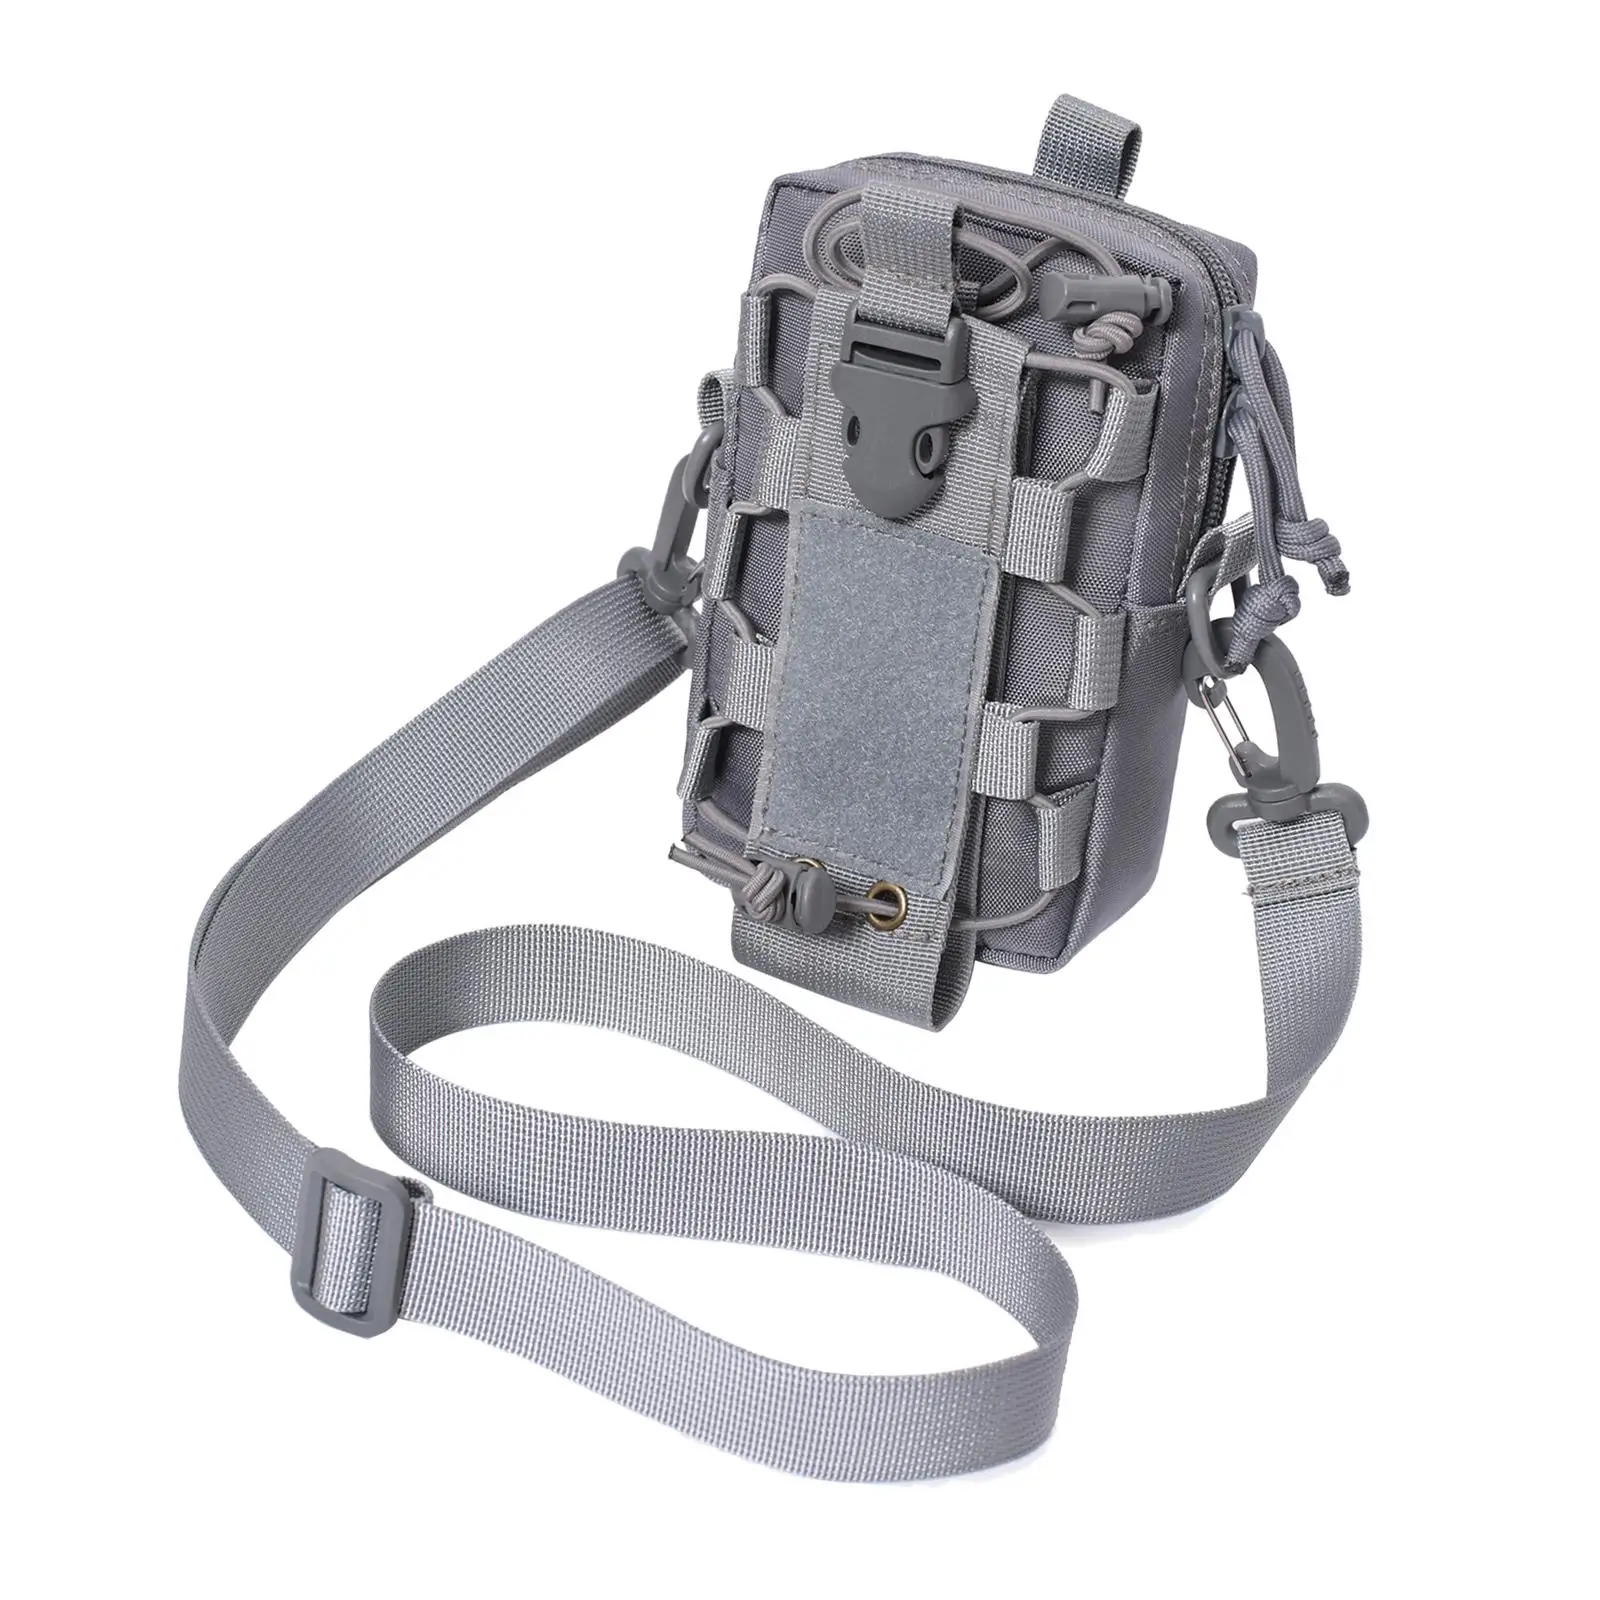 Tactical Bag with Shoulder Strap Waist Bag Pouch Organizer for Travel Hiking